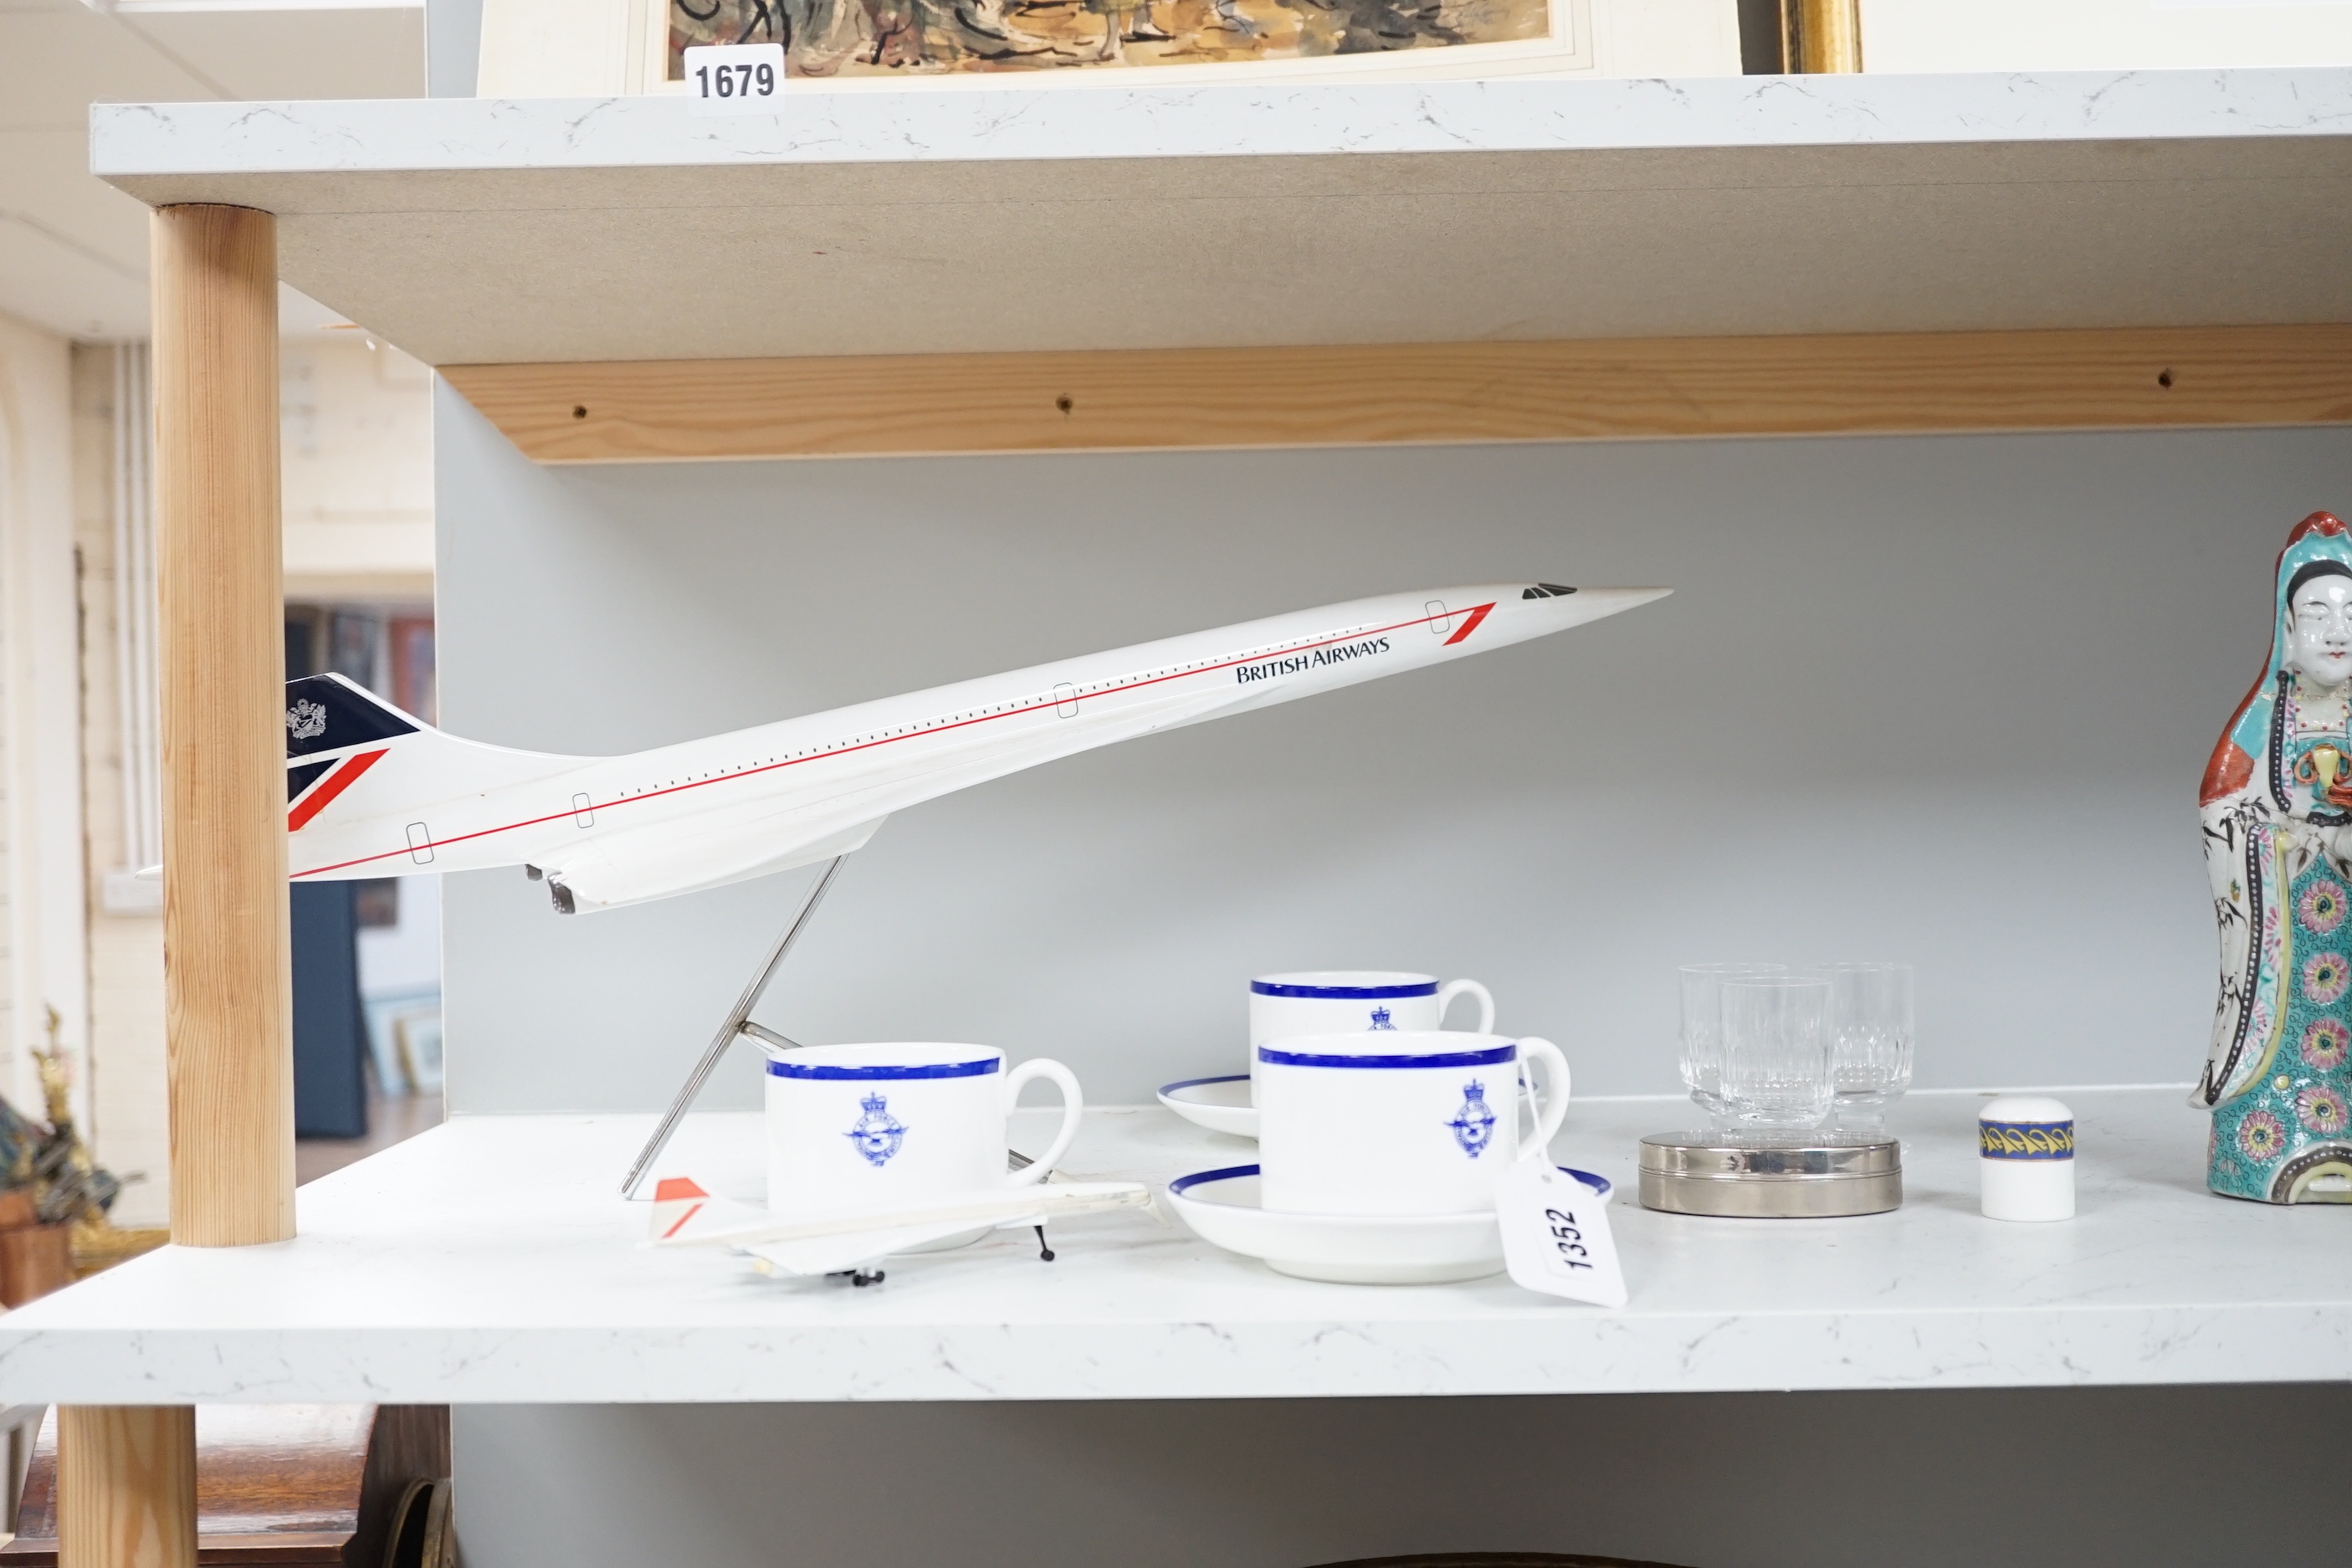 Concorde memorabilia comprising four British Airways glass tots, a pair of plated cased clothes brushes, three graduated scale models of Concorde and a bottle opener together with four Wedgwood Royal Air Force Club mugs